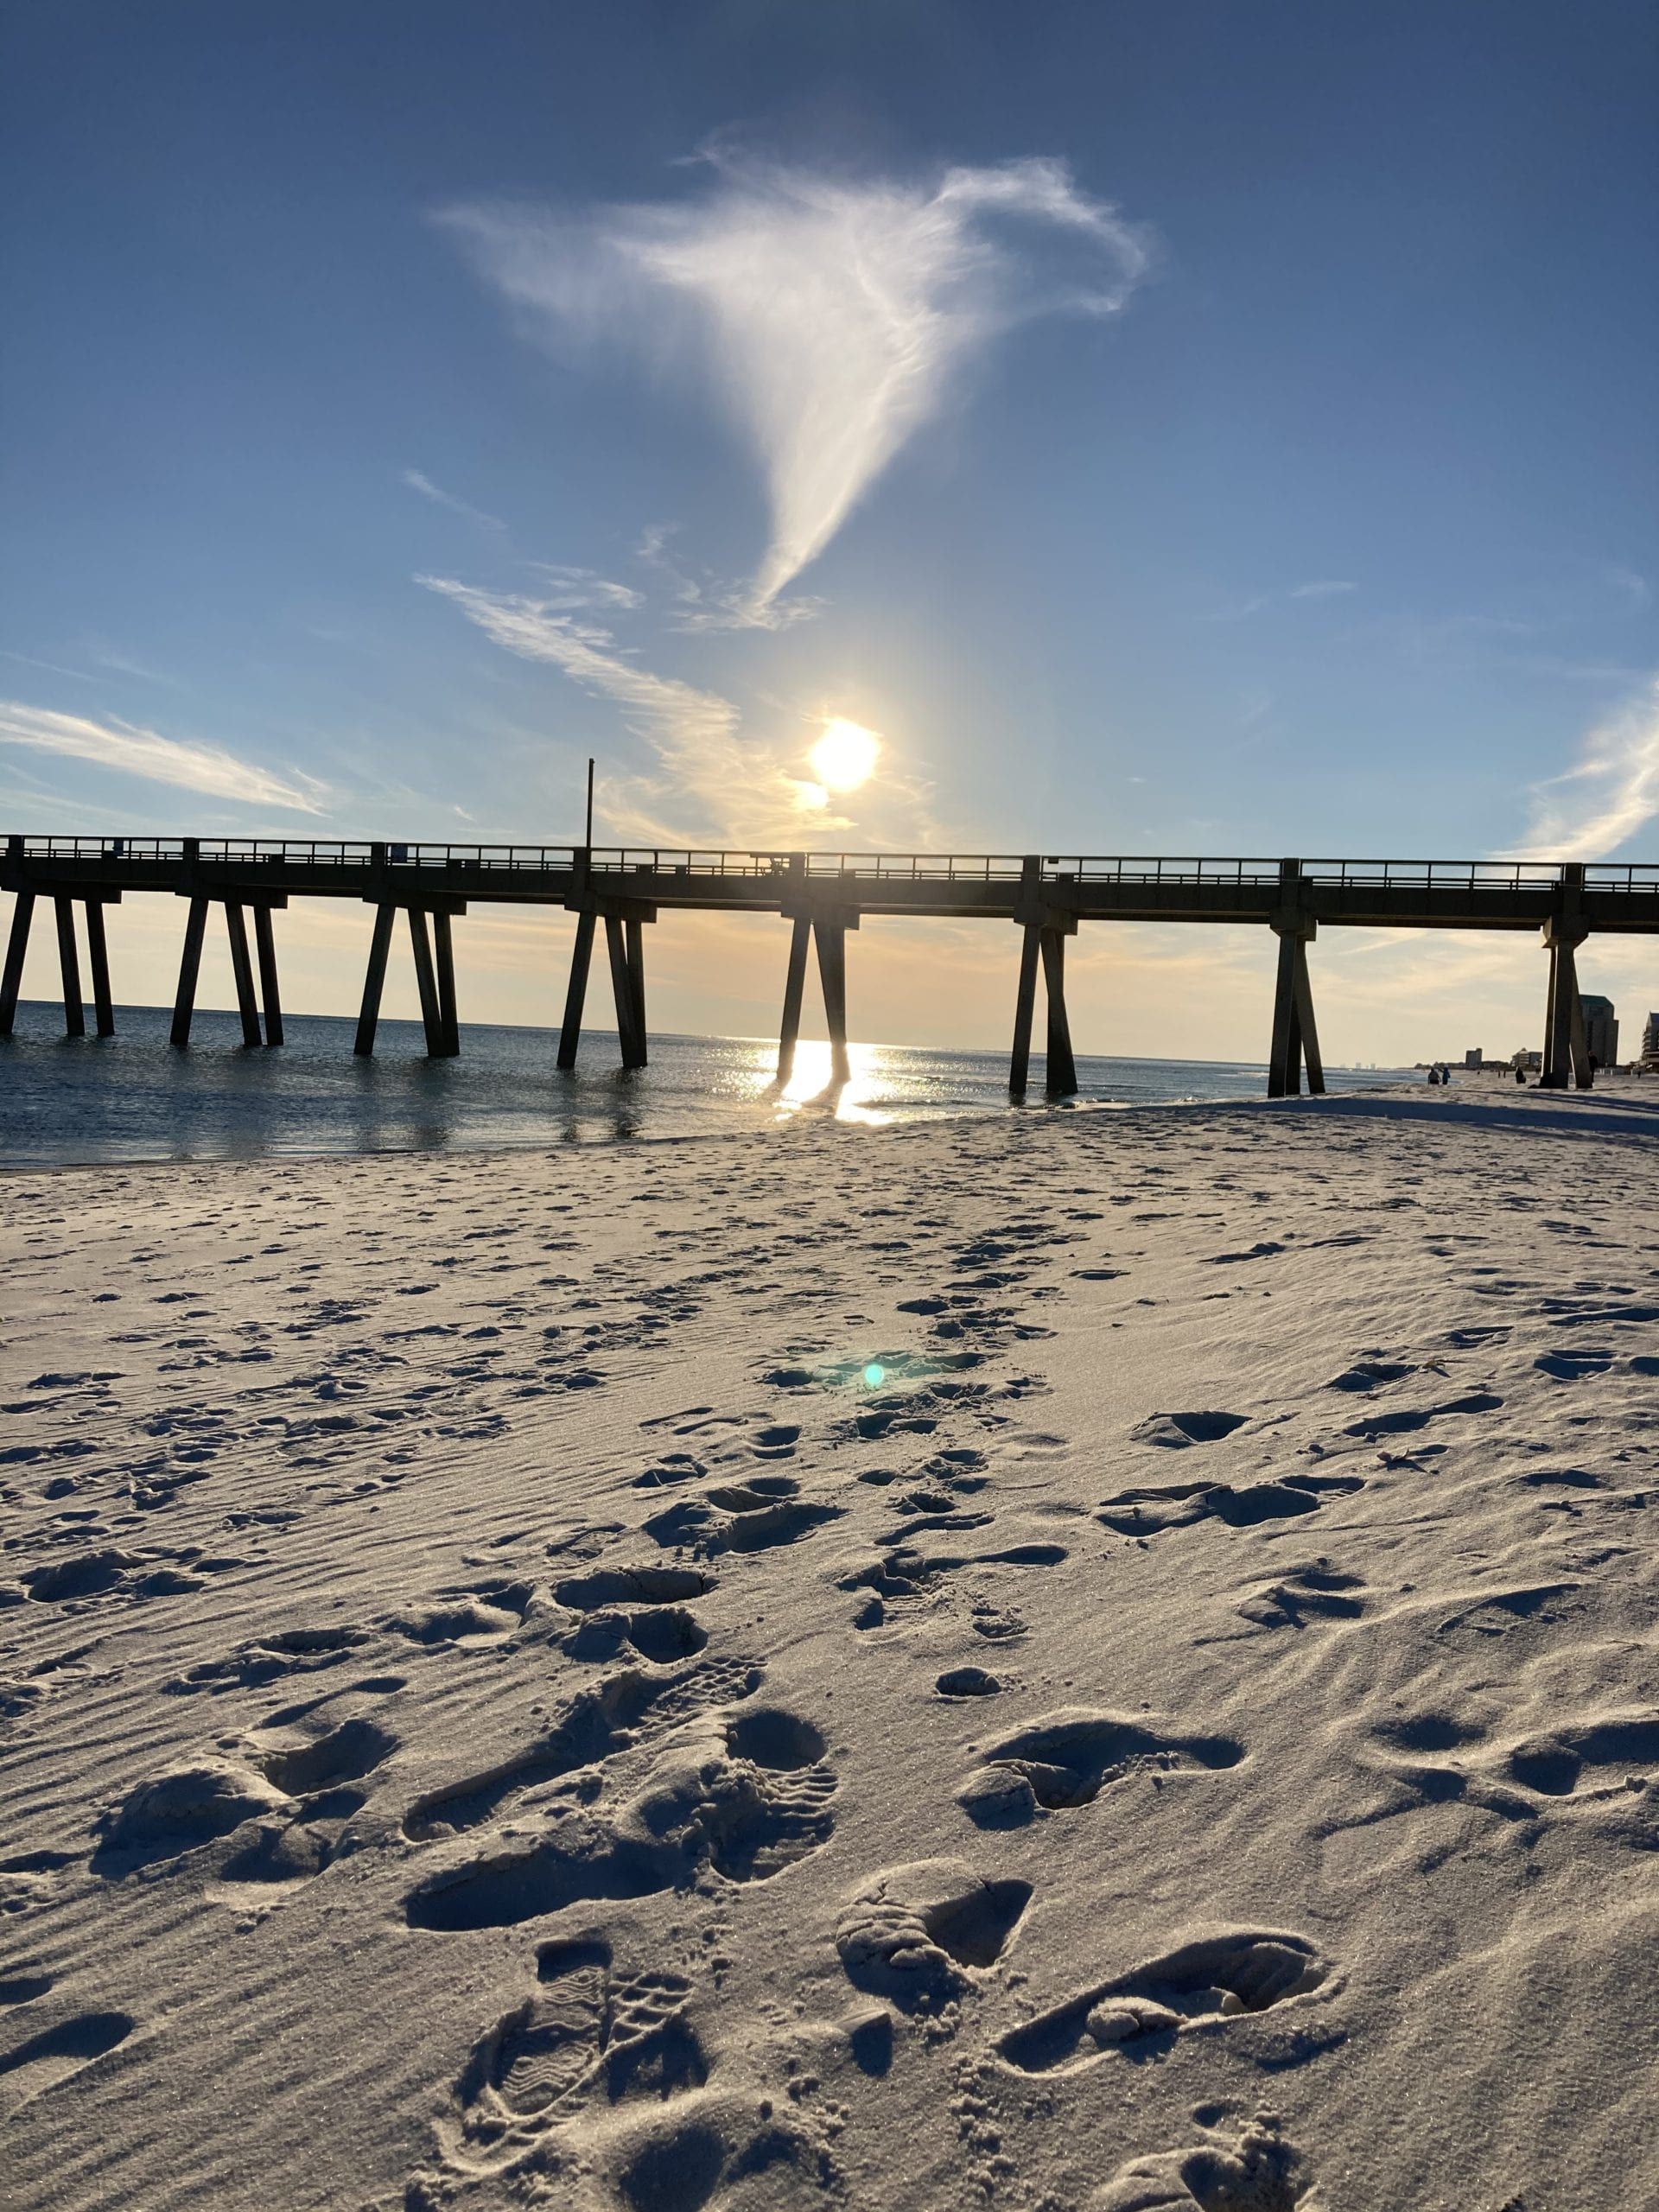 Another cold one today, but at least there will be sunshine. Today's Photo of the Day was submitted by tourist Nicole Shaddix-Olsen, who got in town last week and is staying for a month to enjoy this sunshine.